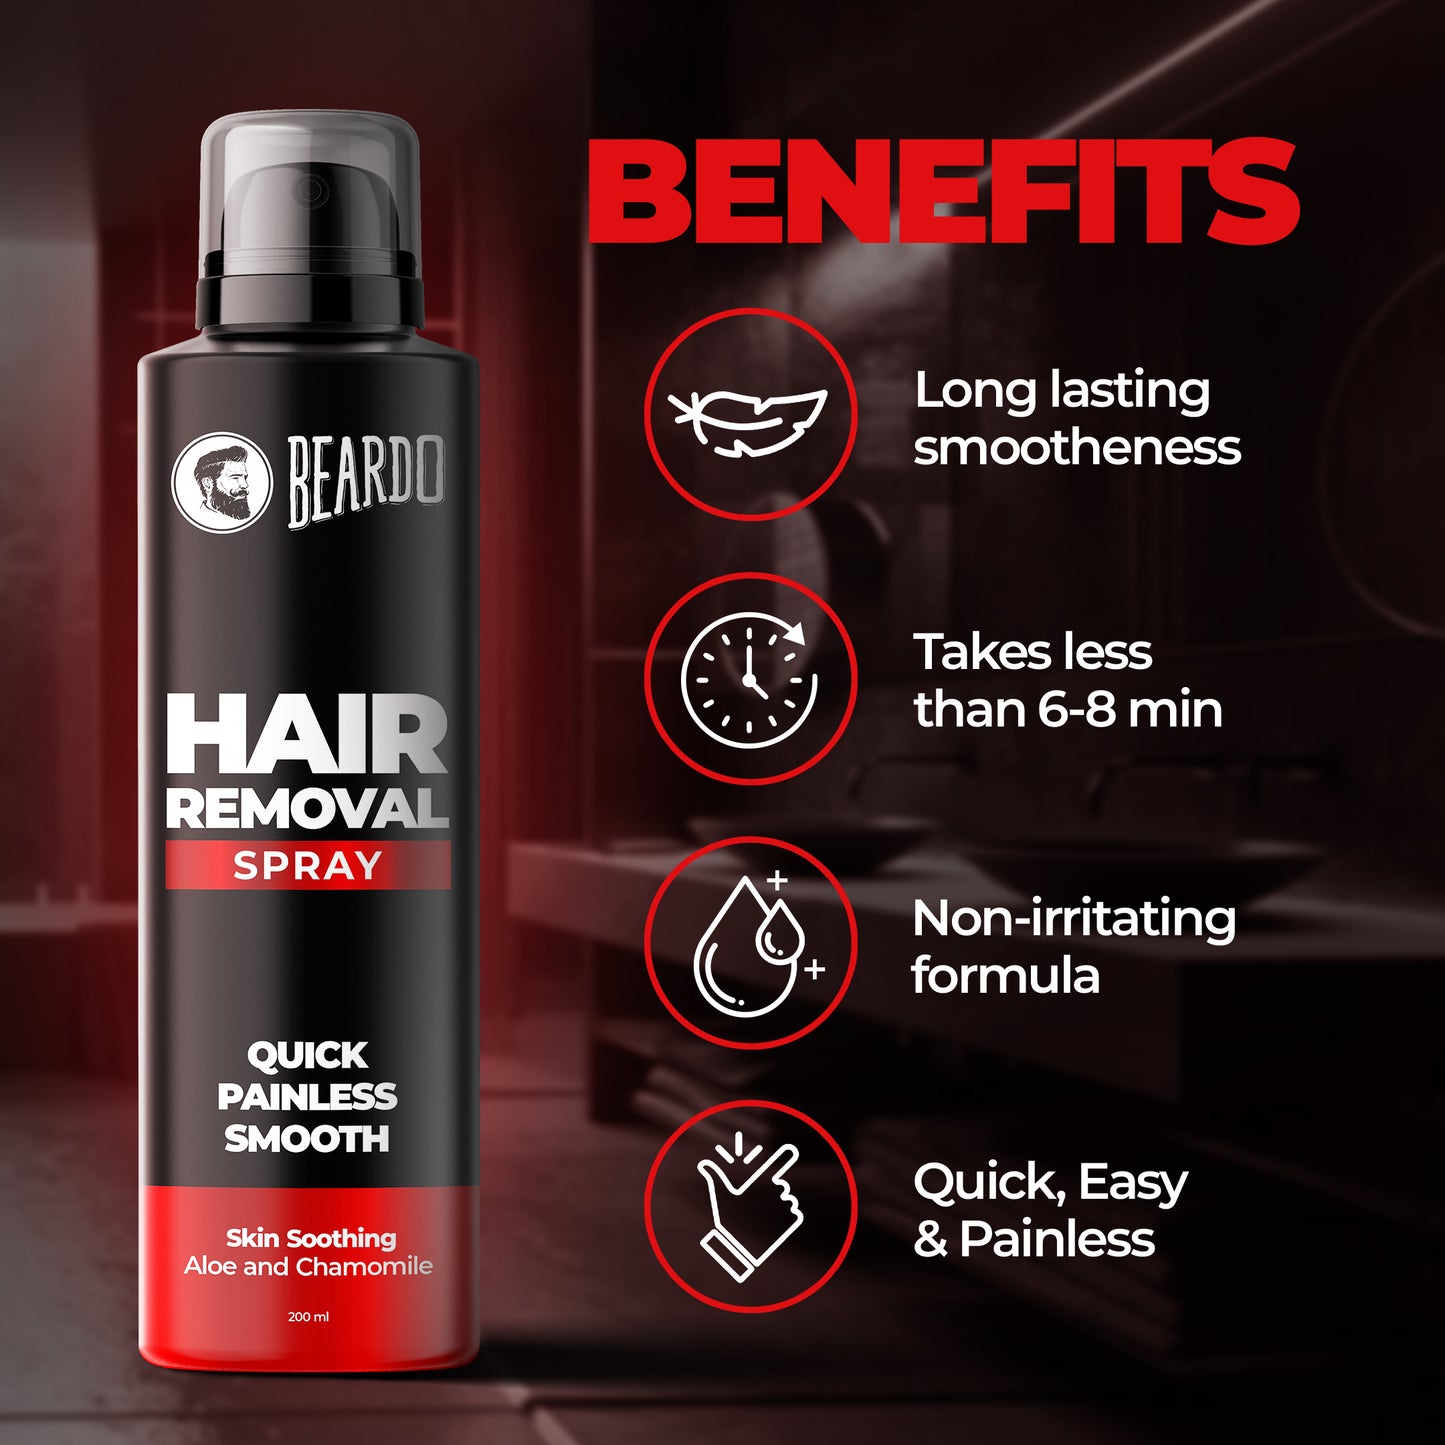 male hair removal near me, best way to get rid of back hair, hair removal spray use, hair removal spray benefits, Is it OK to use hair removal spray, Is shaving or spray removal better for your hair